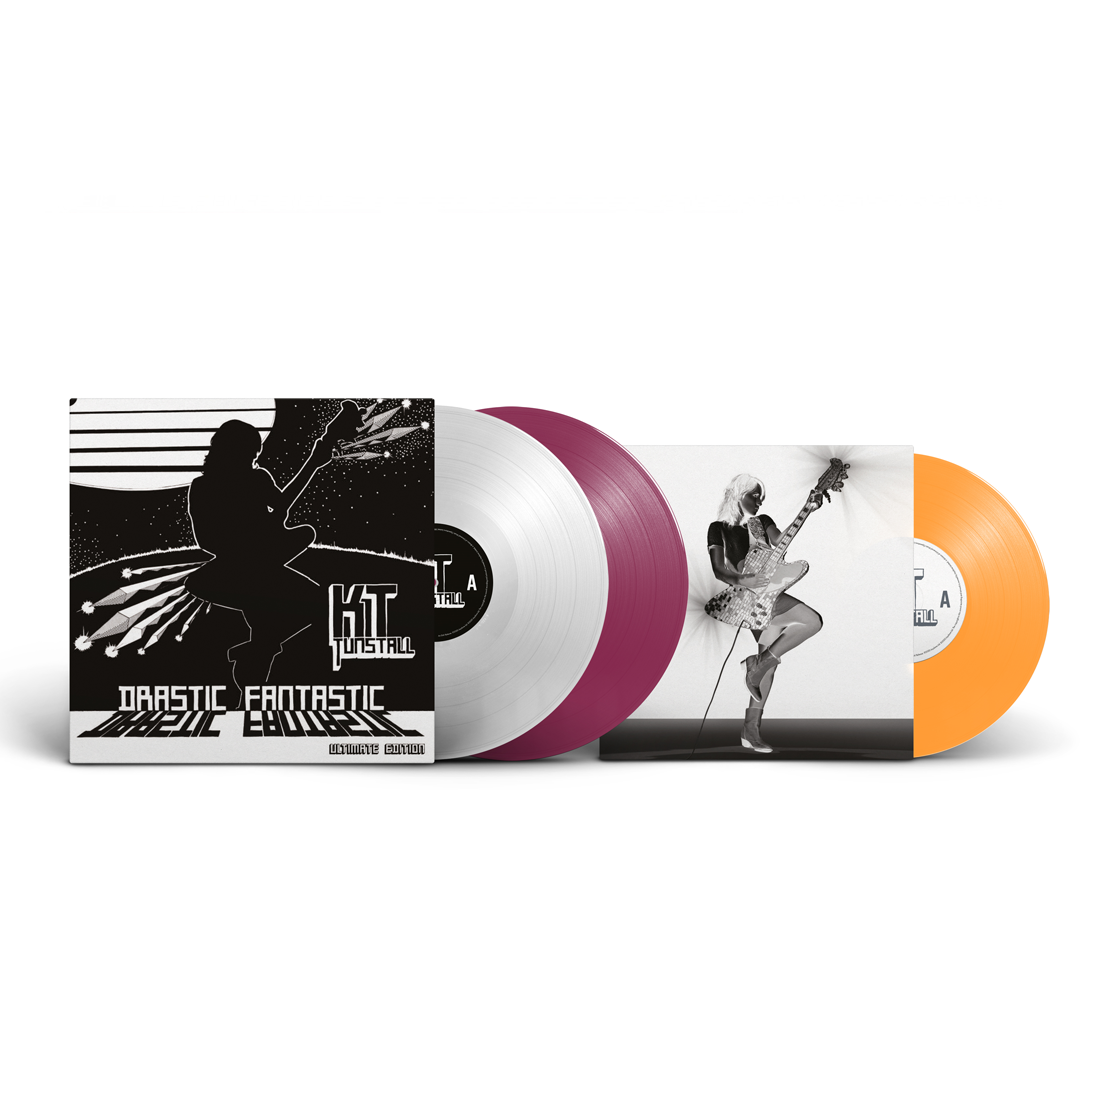 KT Tunstall - Drastic Fantastic (Ultimate Edition): Limited Edition Double LP + 10-Inch Colour Vinyl